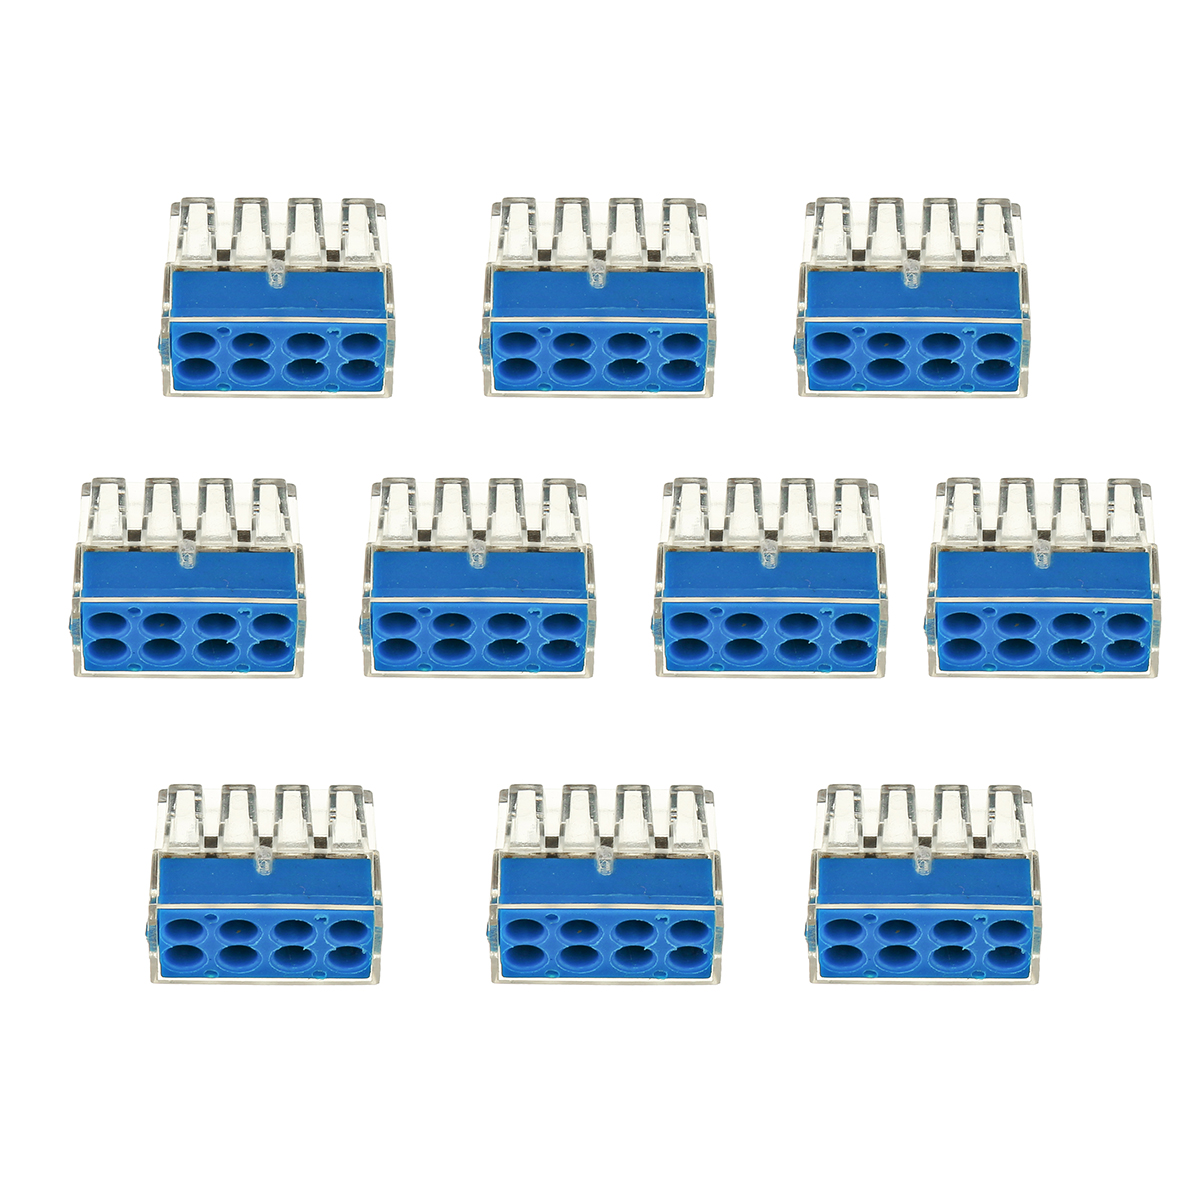 10Pcs-8-Holes-Universal-Compact-Terminal-Block-Electric-Cable-Wire-Connector-1384417-4